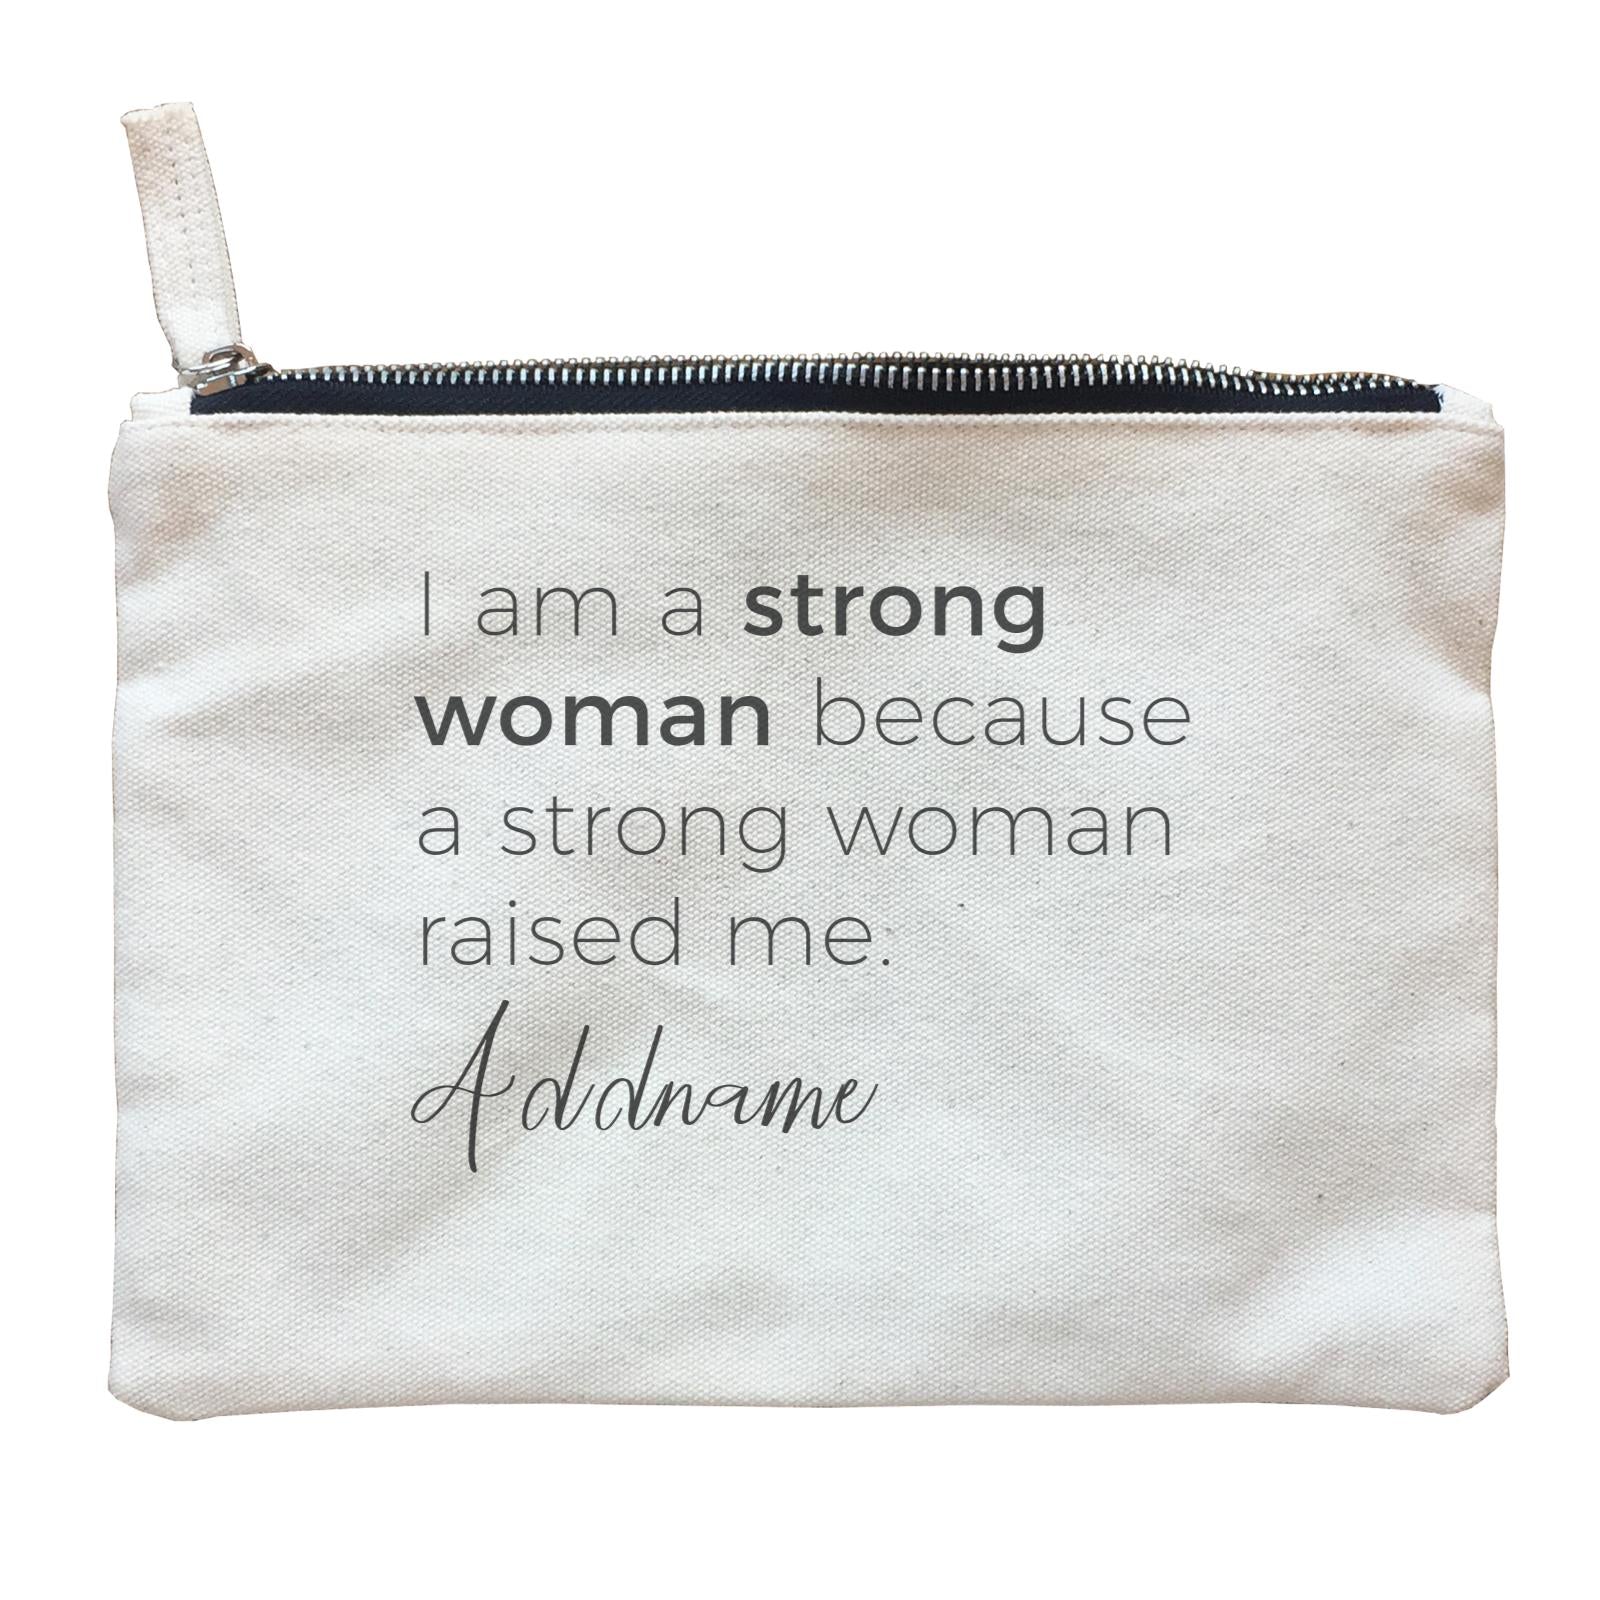 Girl Boss Quotes I Am A Strong Woman Because A Strong Woman Raised Me Addname Zipper Pouch